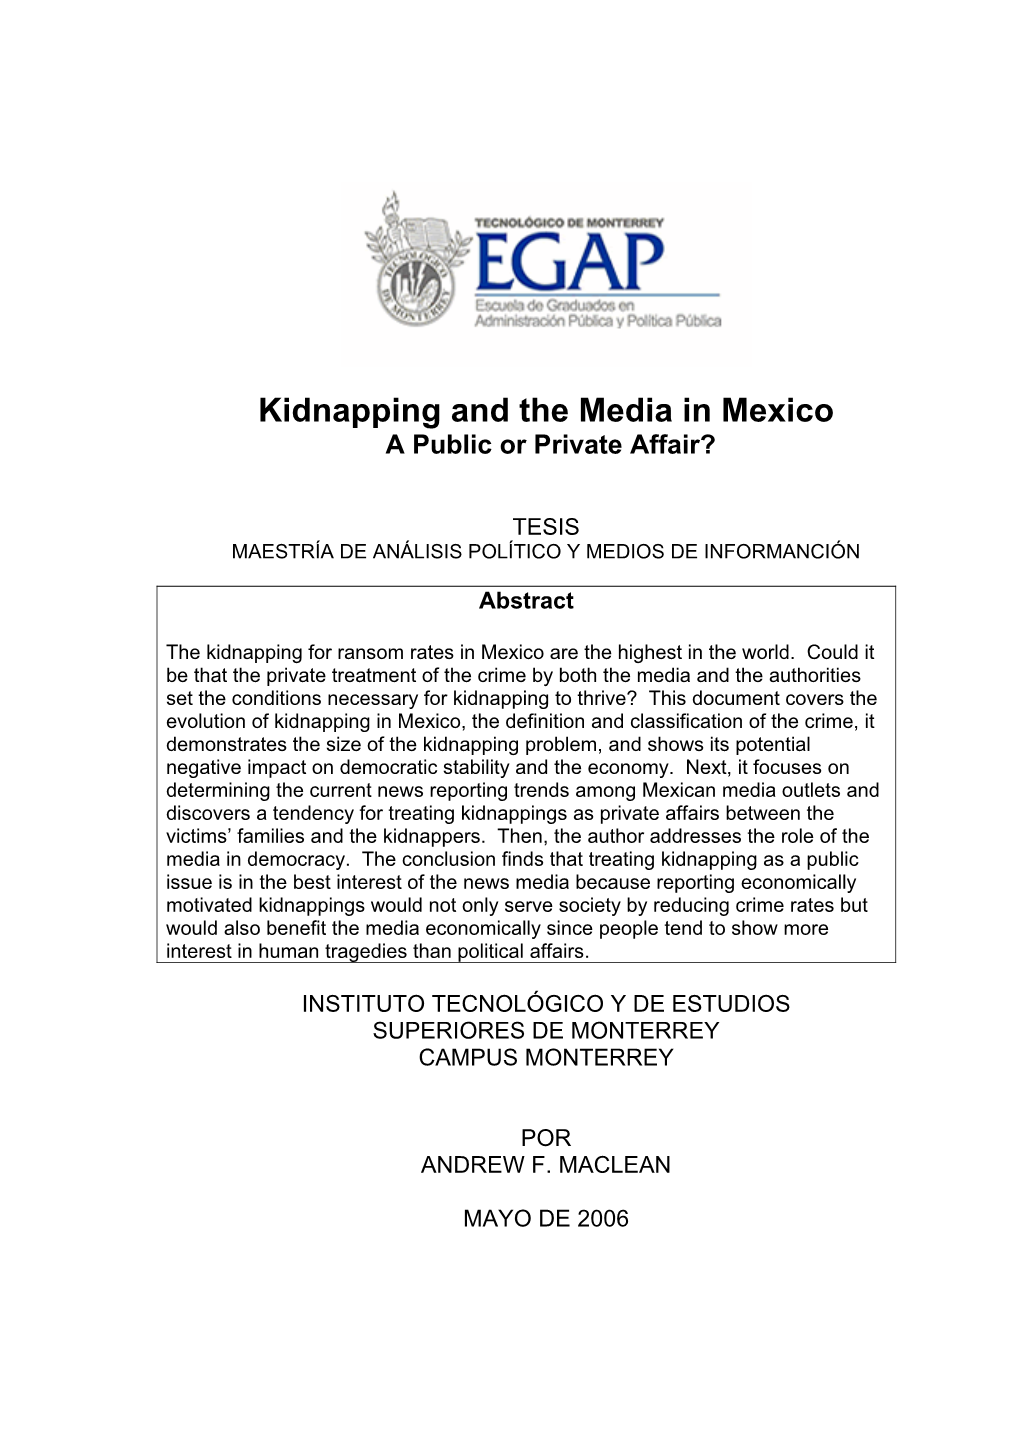 Kidnapping and the Media in Mexico a Public Or Private Affair?